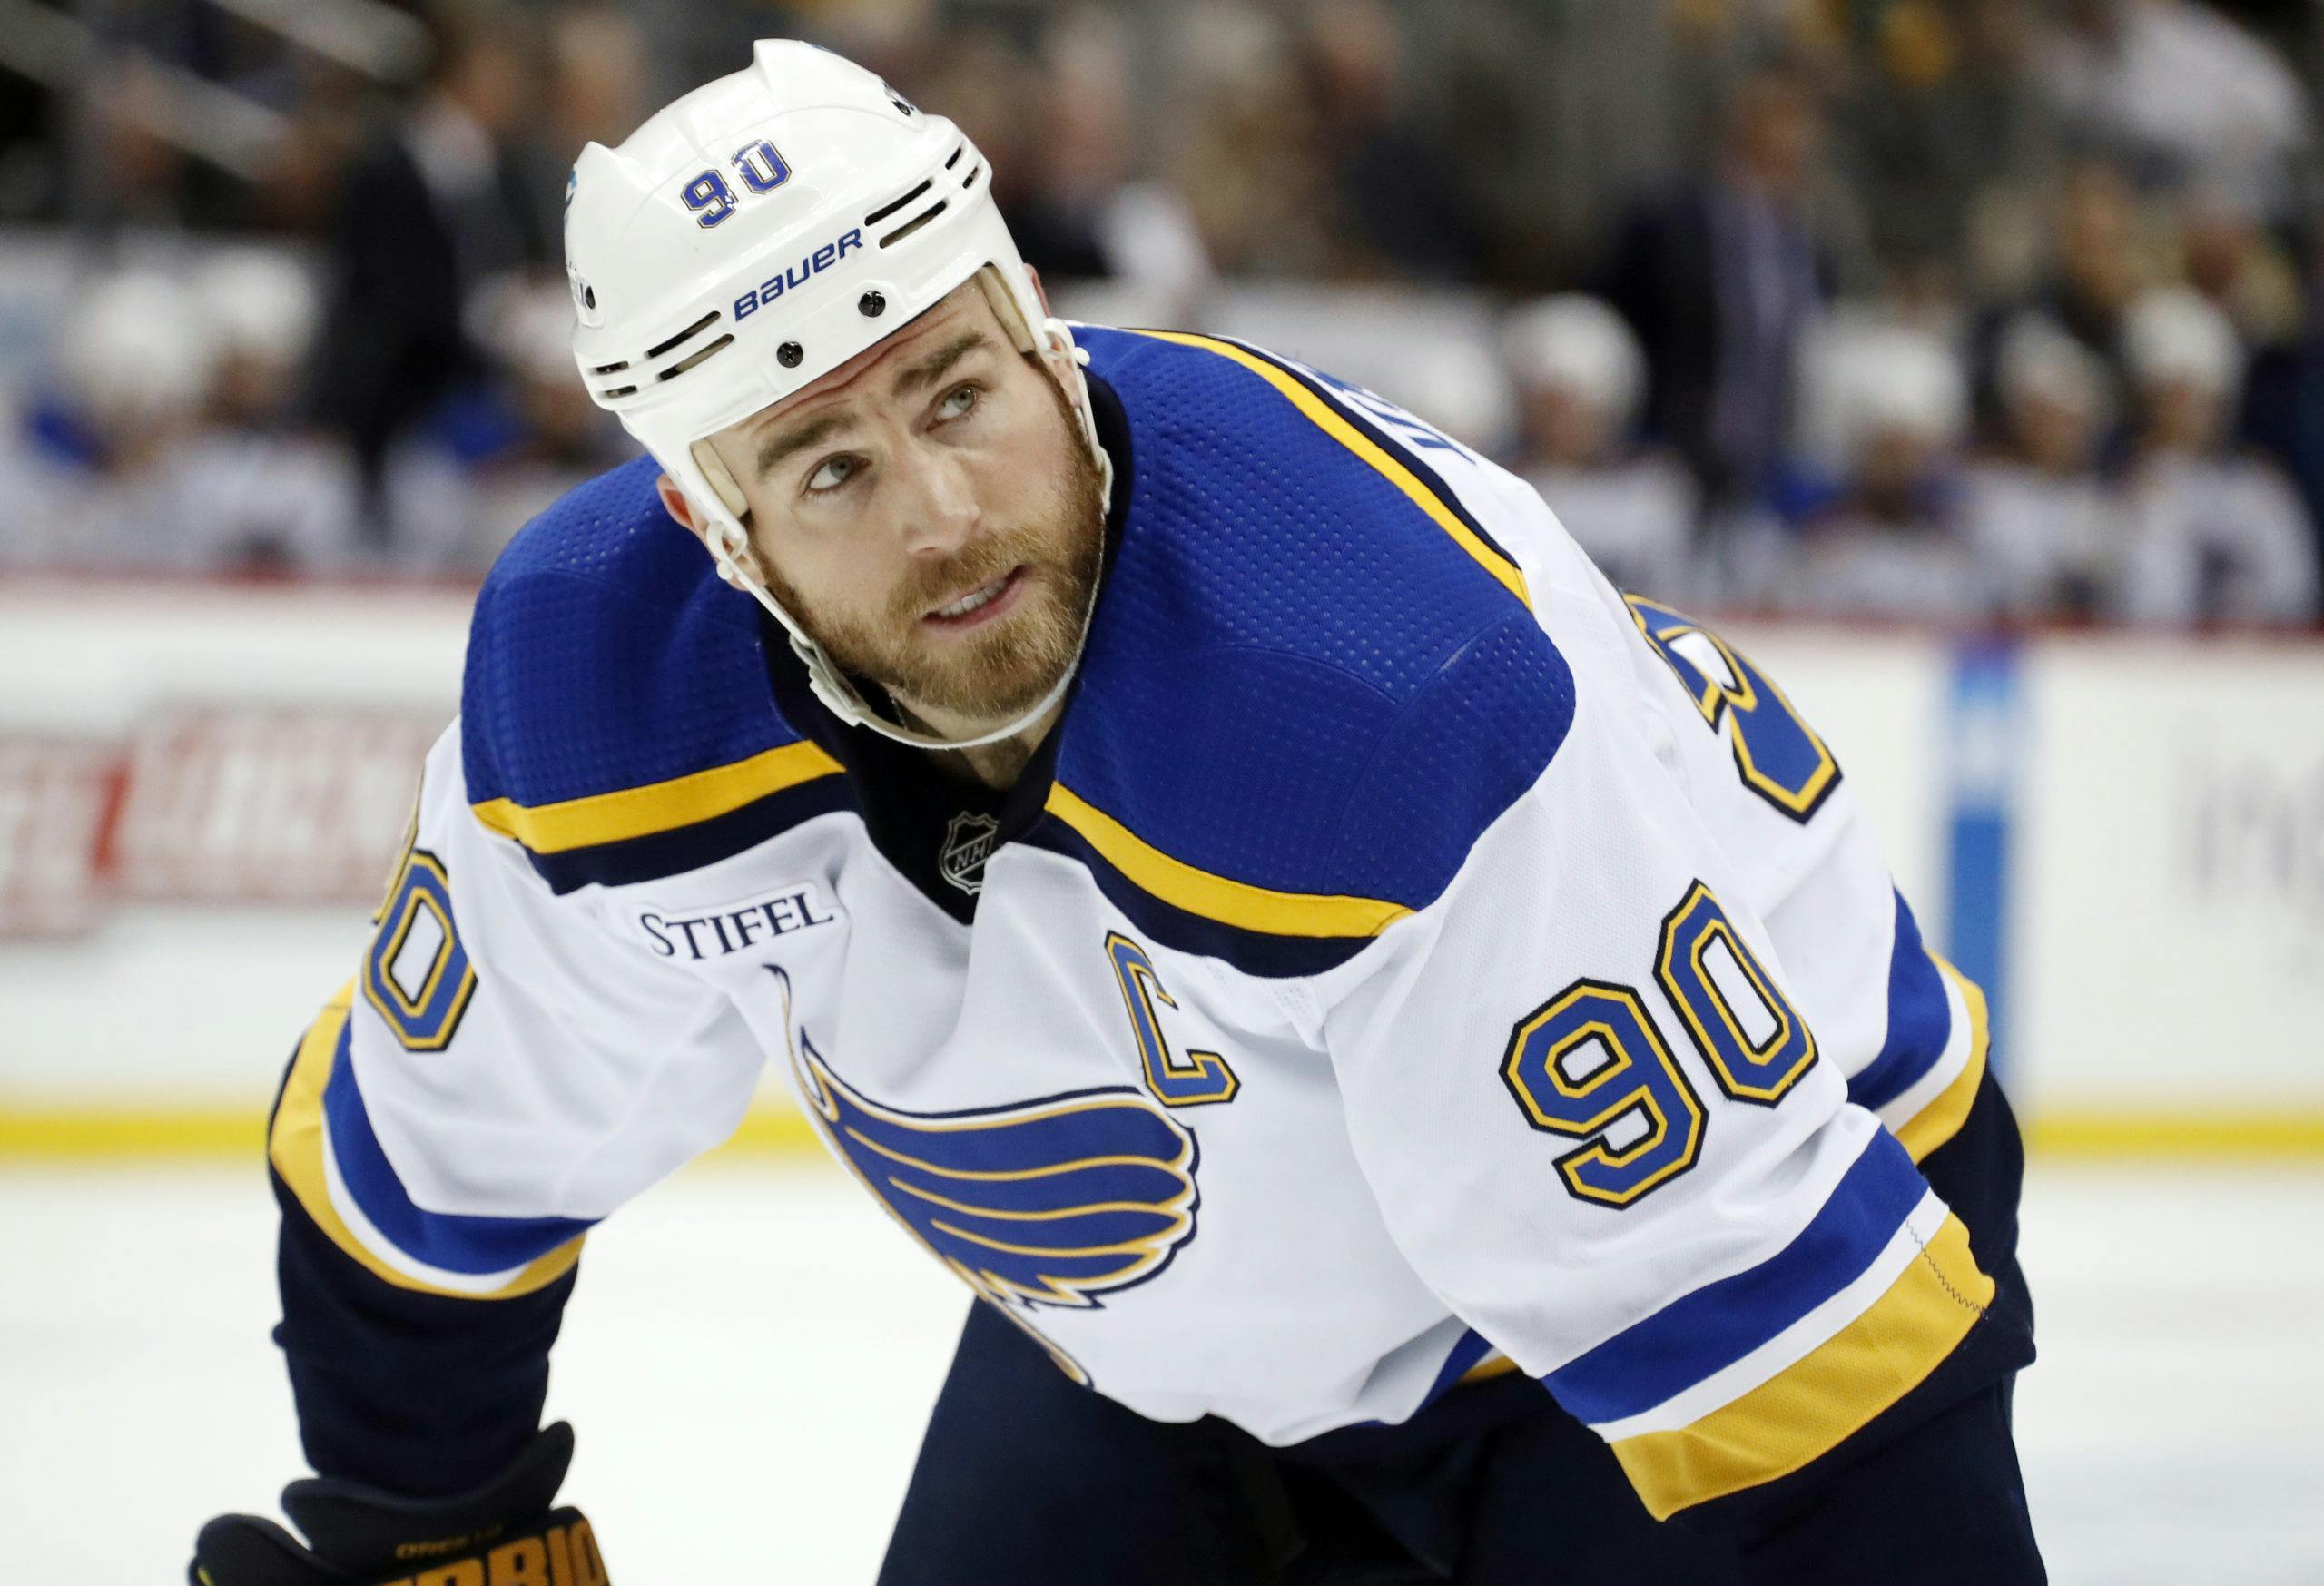 Ryan O'Reilly Reveals Another Factor in Decision to Sign with